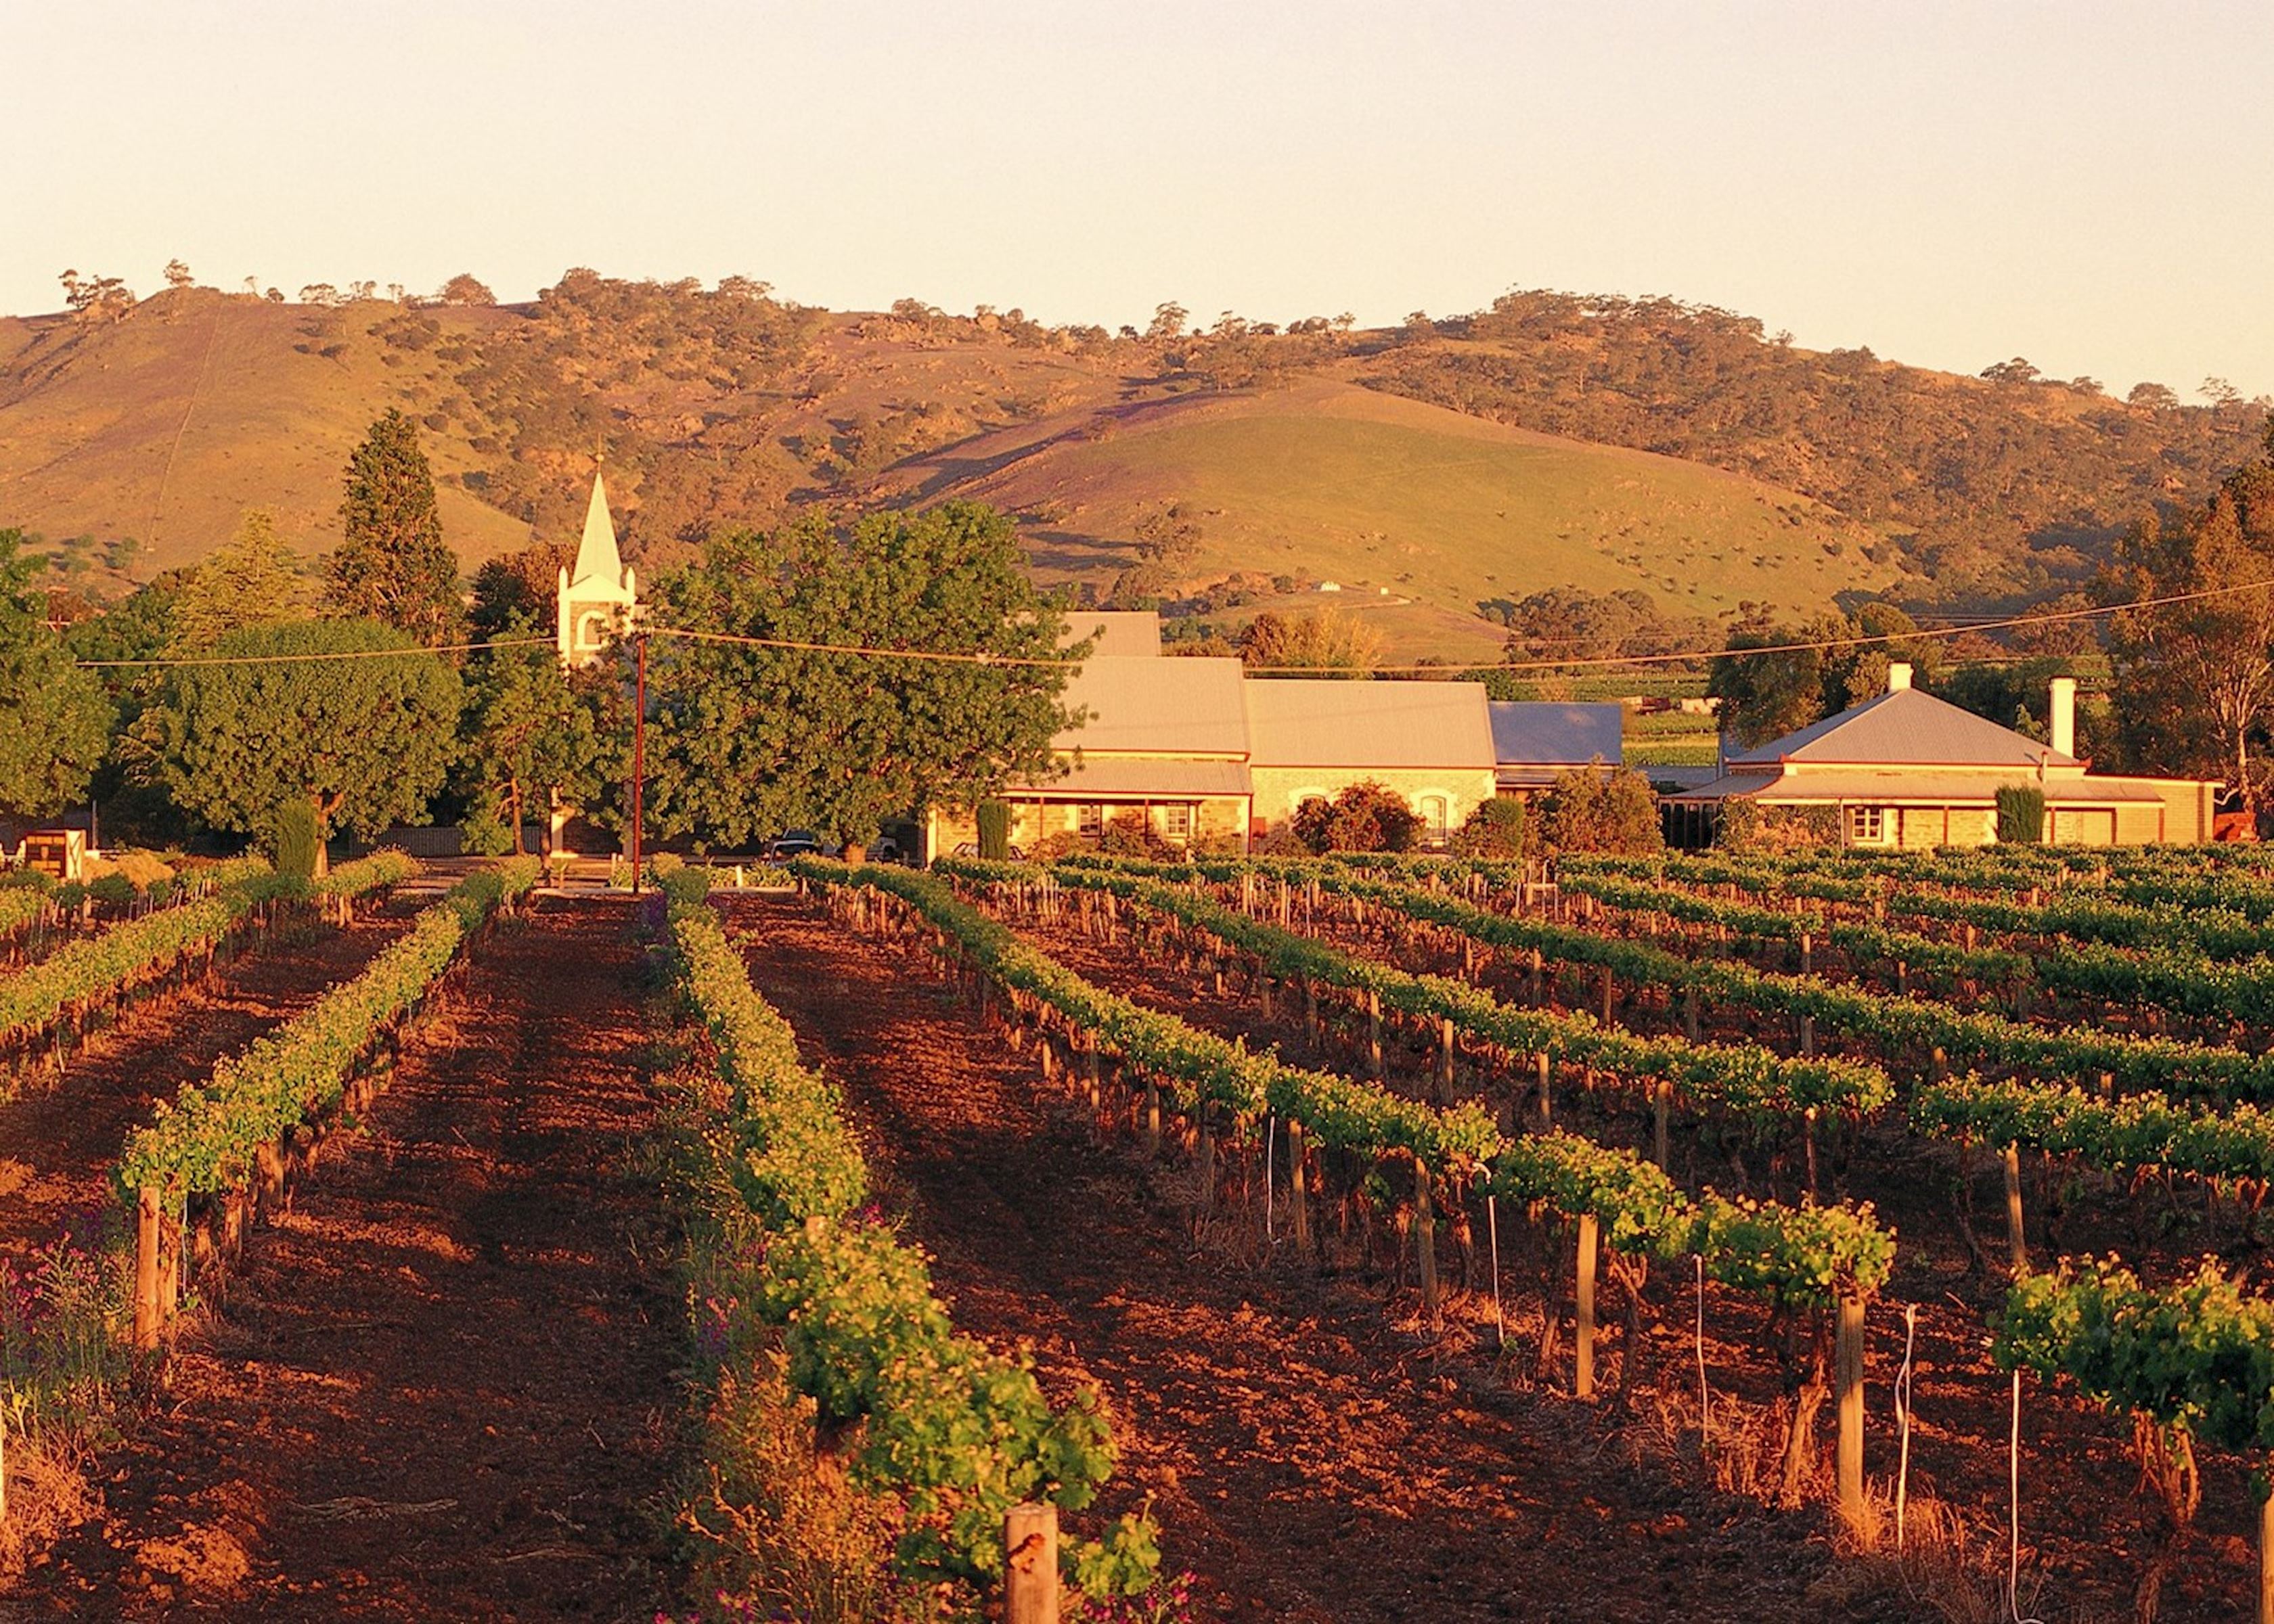 tours to barossa valley from adelaide